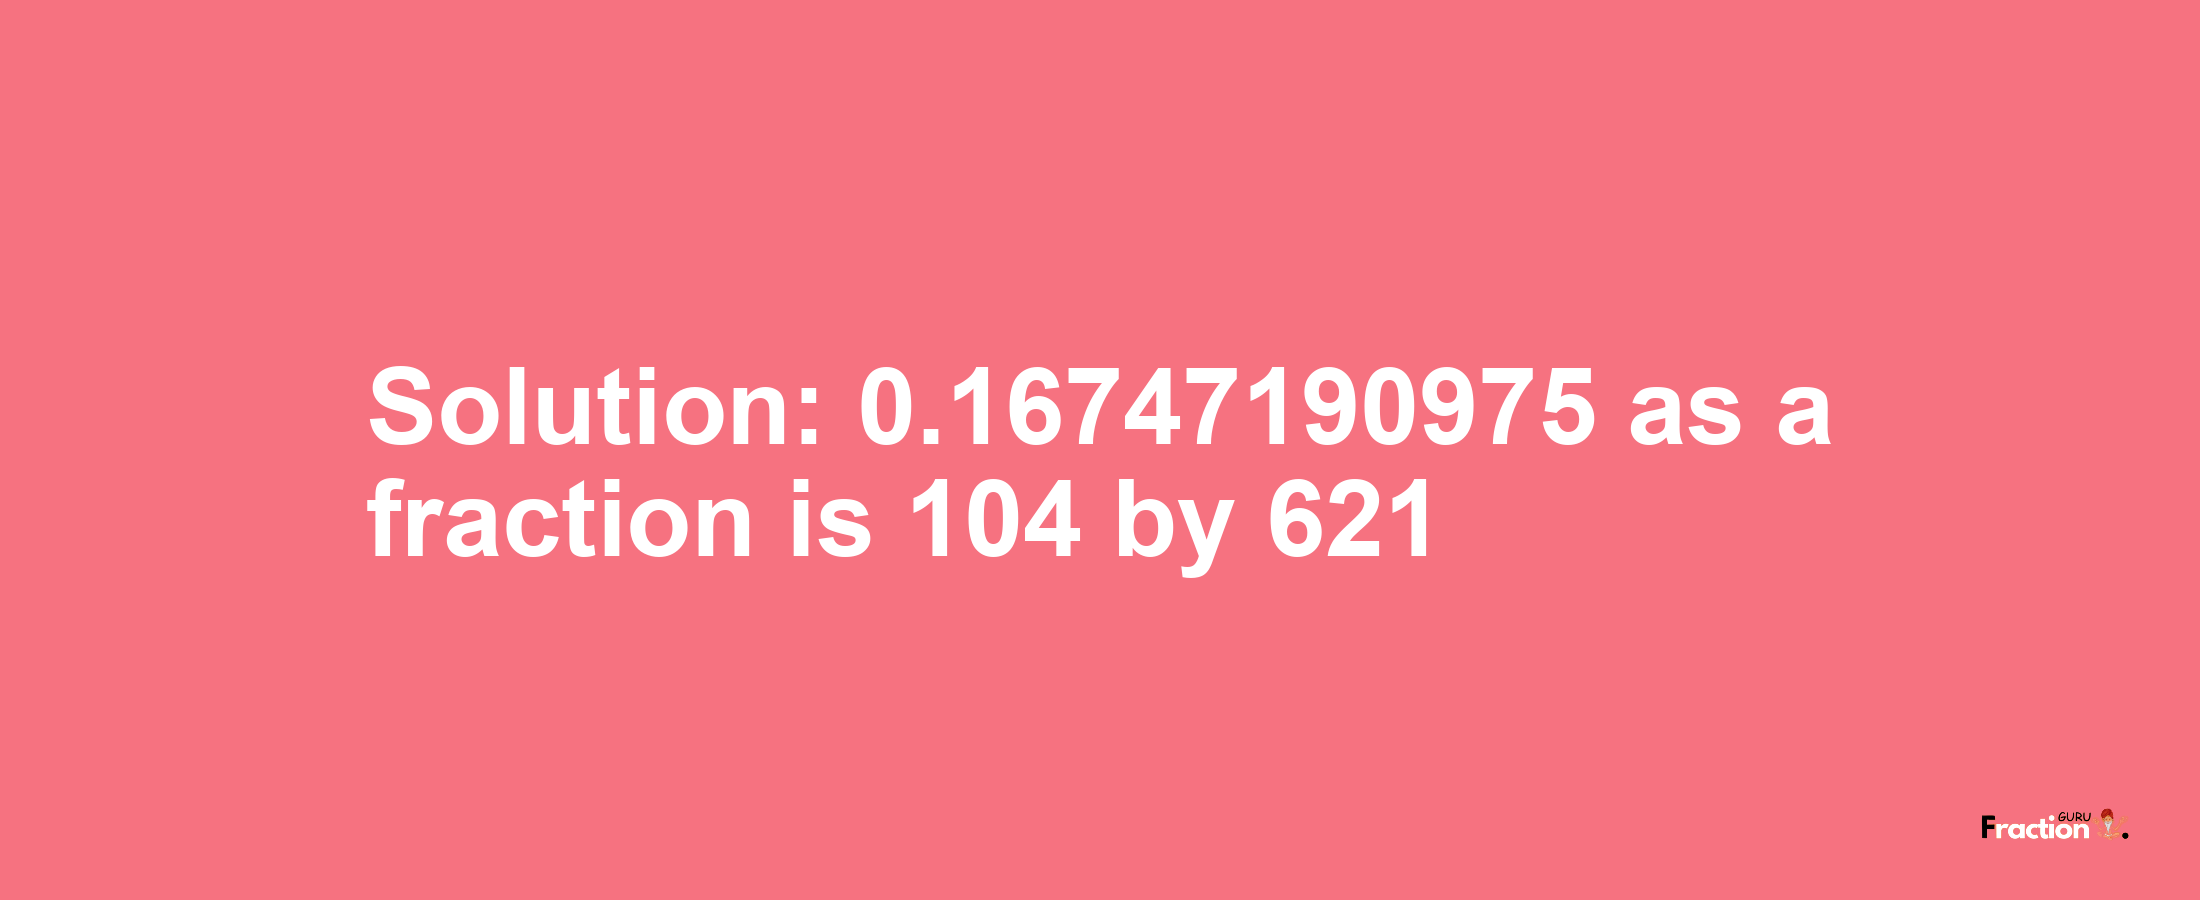 Solution:0.16747190975 as a fraction is 104/621